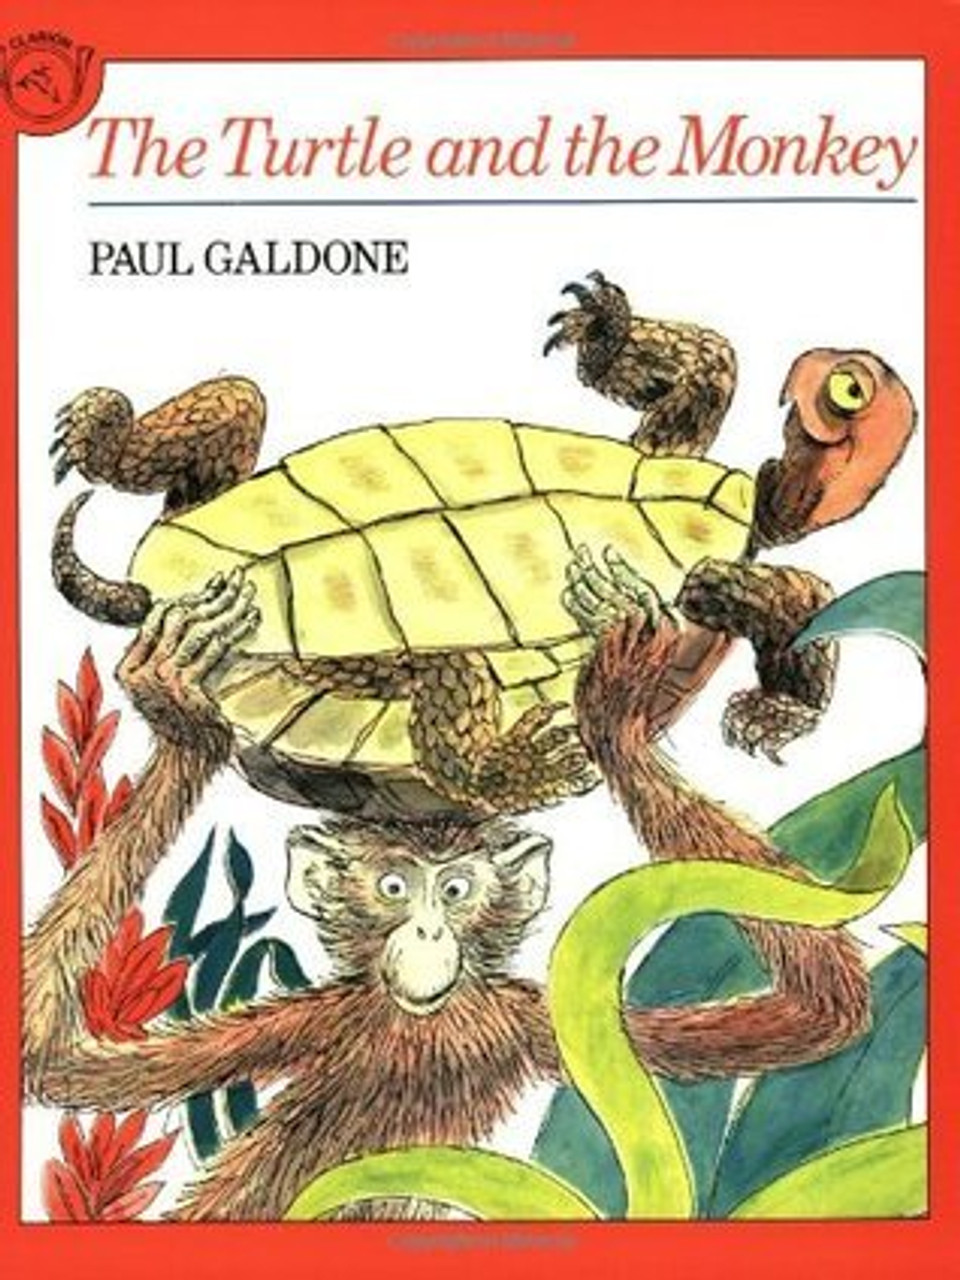 Paul Galdone / The Turtle and the Monkey (Children's Picture Book)